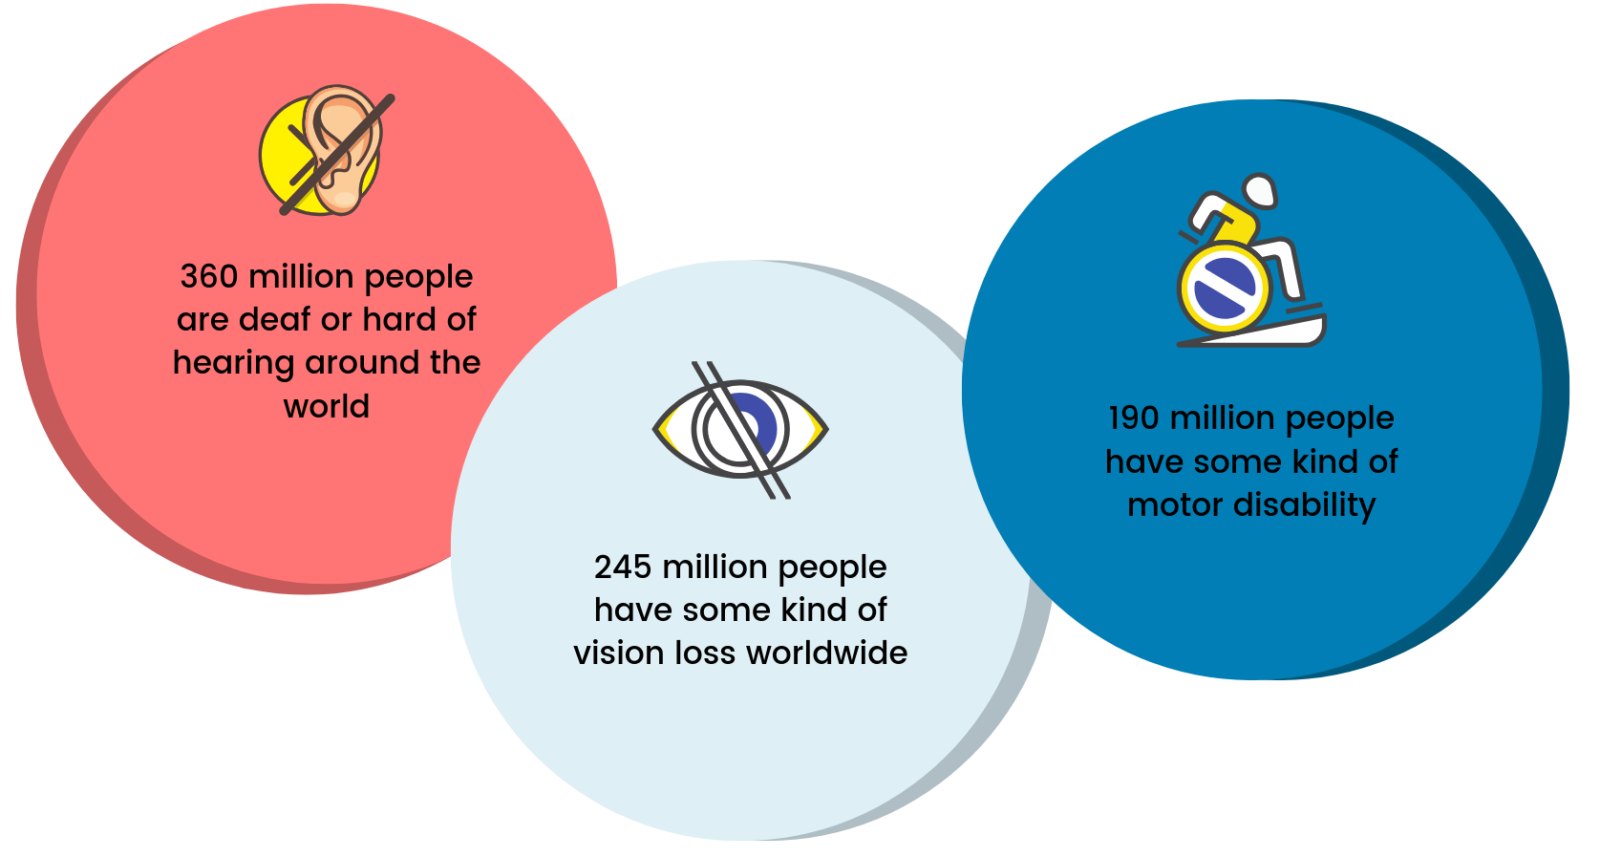 360 million people are deaf or hard of hearing around the world 245 million people have some kind of vision loss 190 million people have some kind of motor disability 